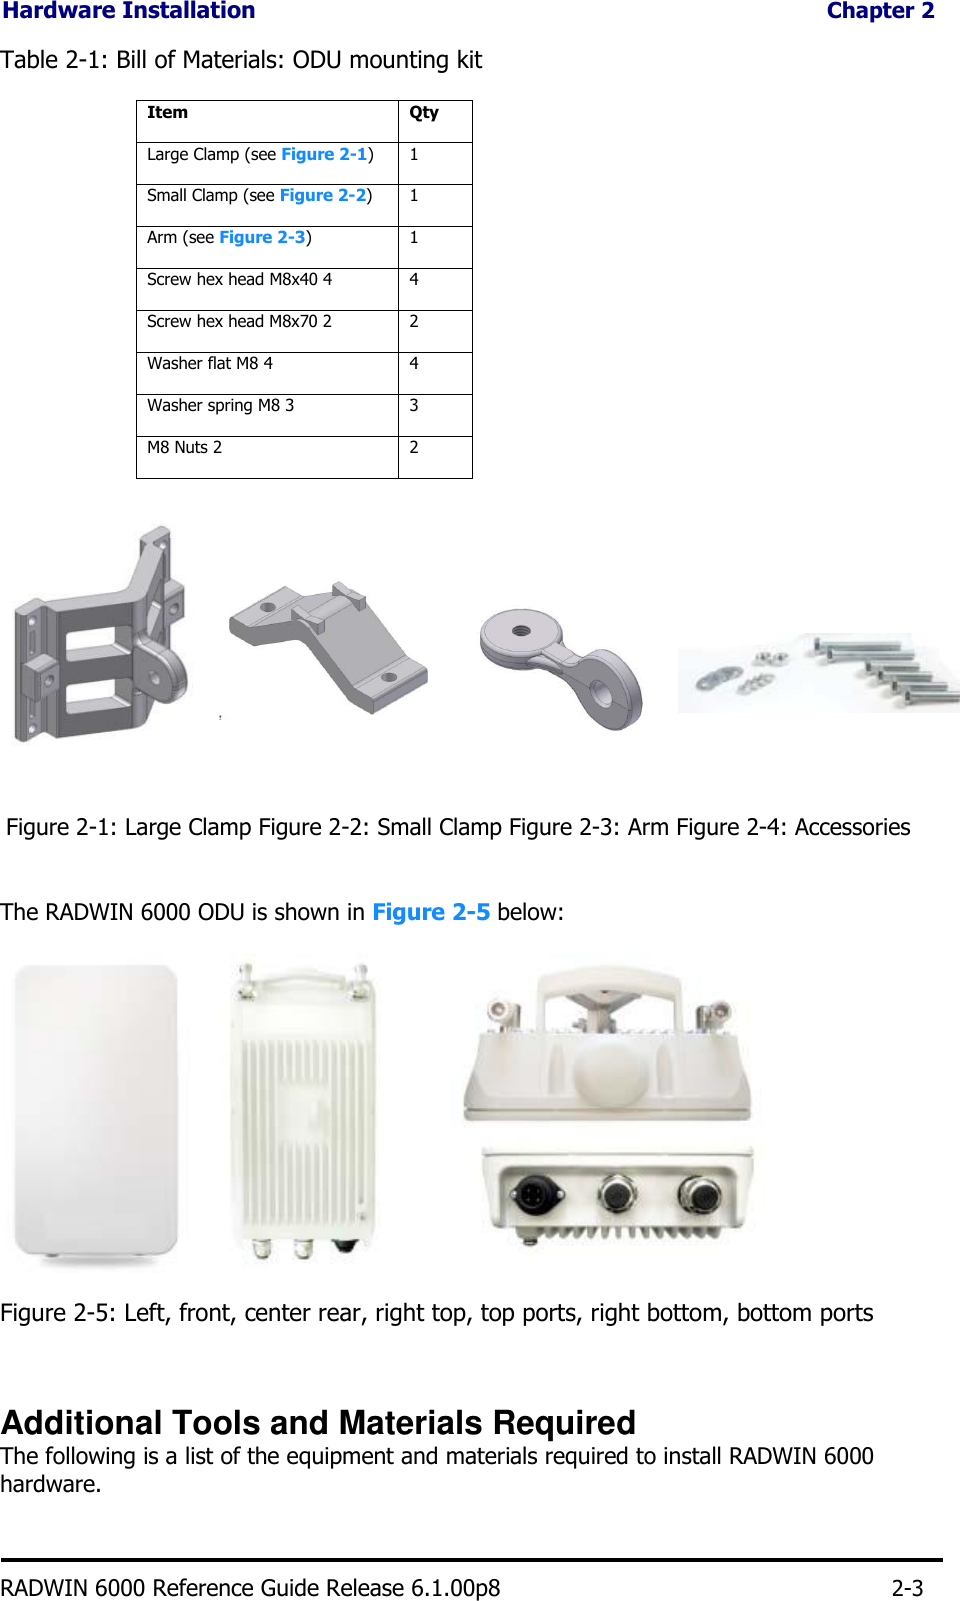 Hardware Installation Chapter 2  Table 2-1: Bill of Materials: ODU mounting kit                              Figure 2-1: Large Clamp Figure 2-2: Small Clamp Figure 2-3: Arm Figure 2-4: Accessories   The RADWIN 6000 ODU is shown in Figure 2-5 below:            Figure 2-5: Left, front, center rear, right top, top ports, right bottom, bottom ports   Additional Tools and Materials Required The following is a list of the equipment and materials required to install RADWIN 6000 hardware.   RADWIN 6000 Reference Guide Release 6.1.00p8 2-3 Item   Qty Large Clamp (see Figure 2-1)   1 Small Clamp (see Figure 2-2)   1 Arm (see Figure 2-3)   1 Screw hex head M8x40 4  4 Screw hex head M8x70 2  2 Washer flat M8 4  4 Washer spring M8 3  3 M8 Nuts 2  2 